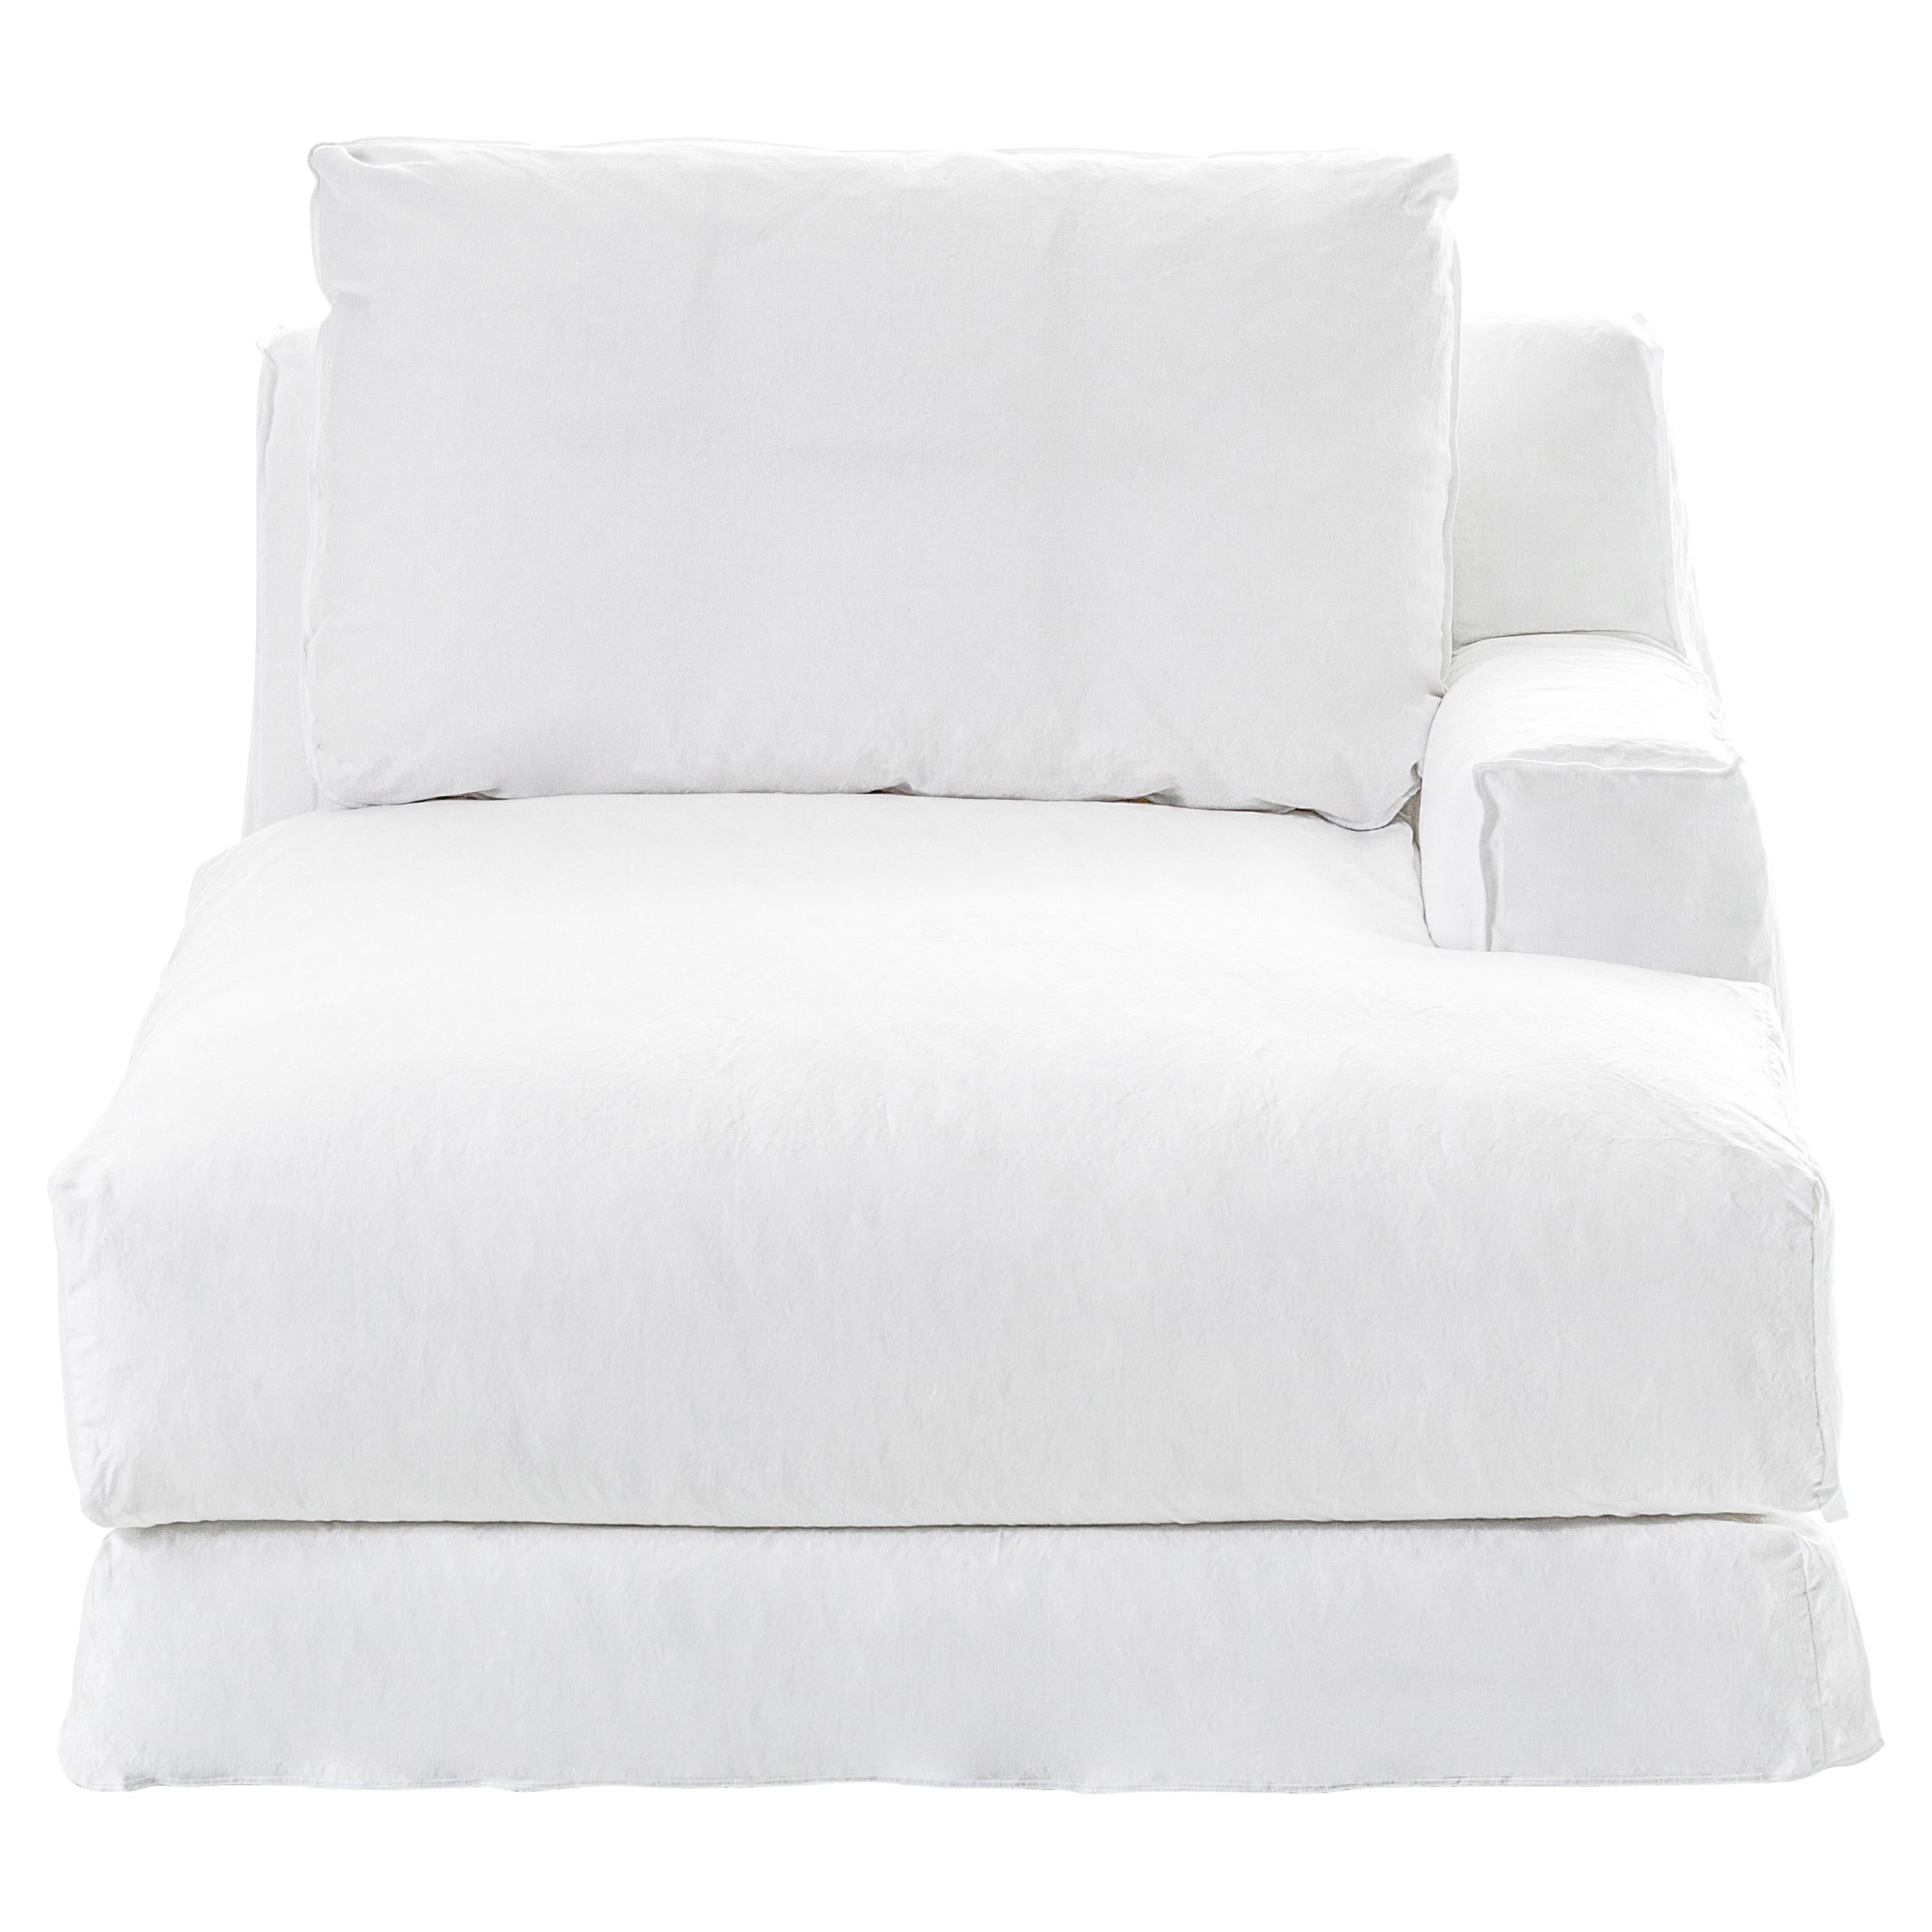 Gervasoni Loll 20 R Arm Dormeuse in White Linen Upholstery by Paola Navone